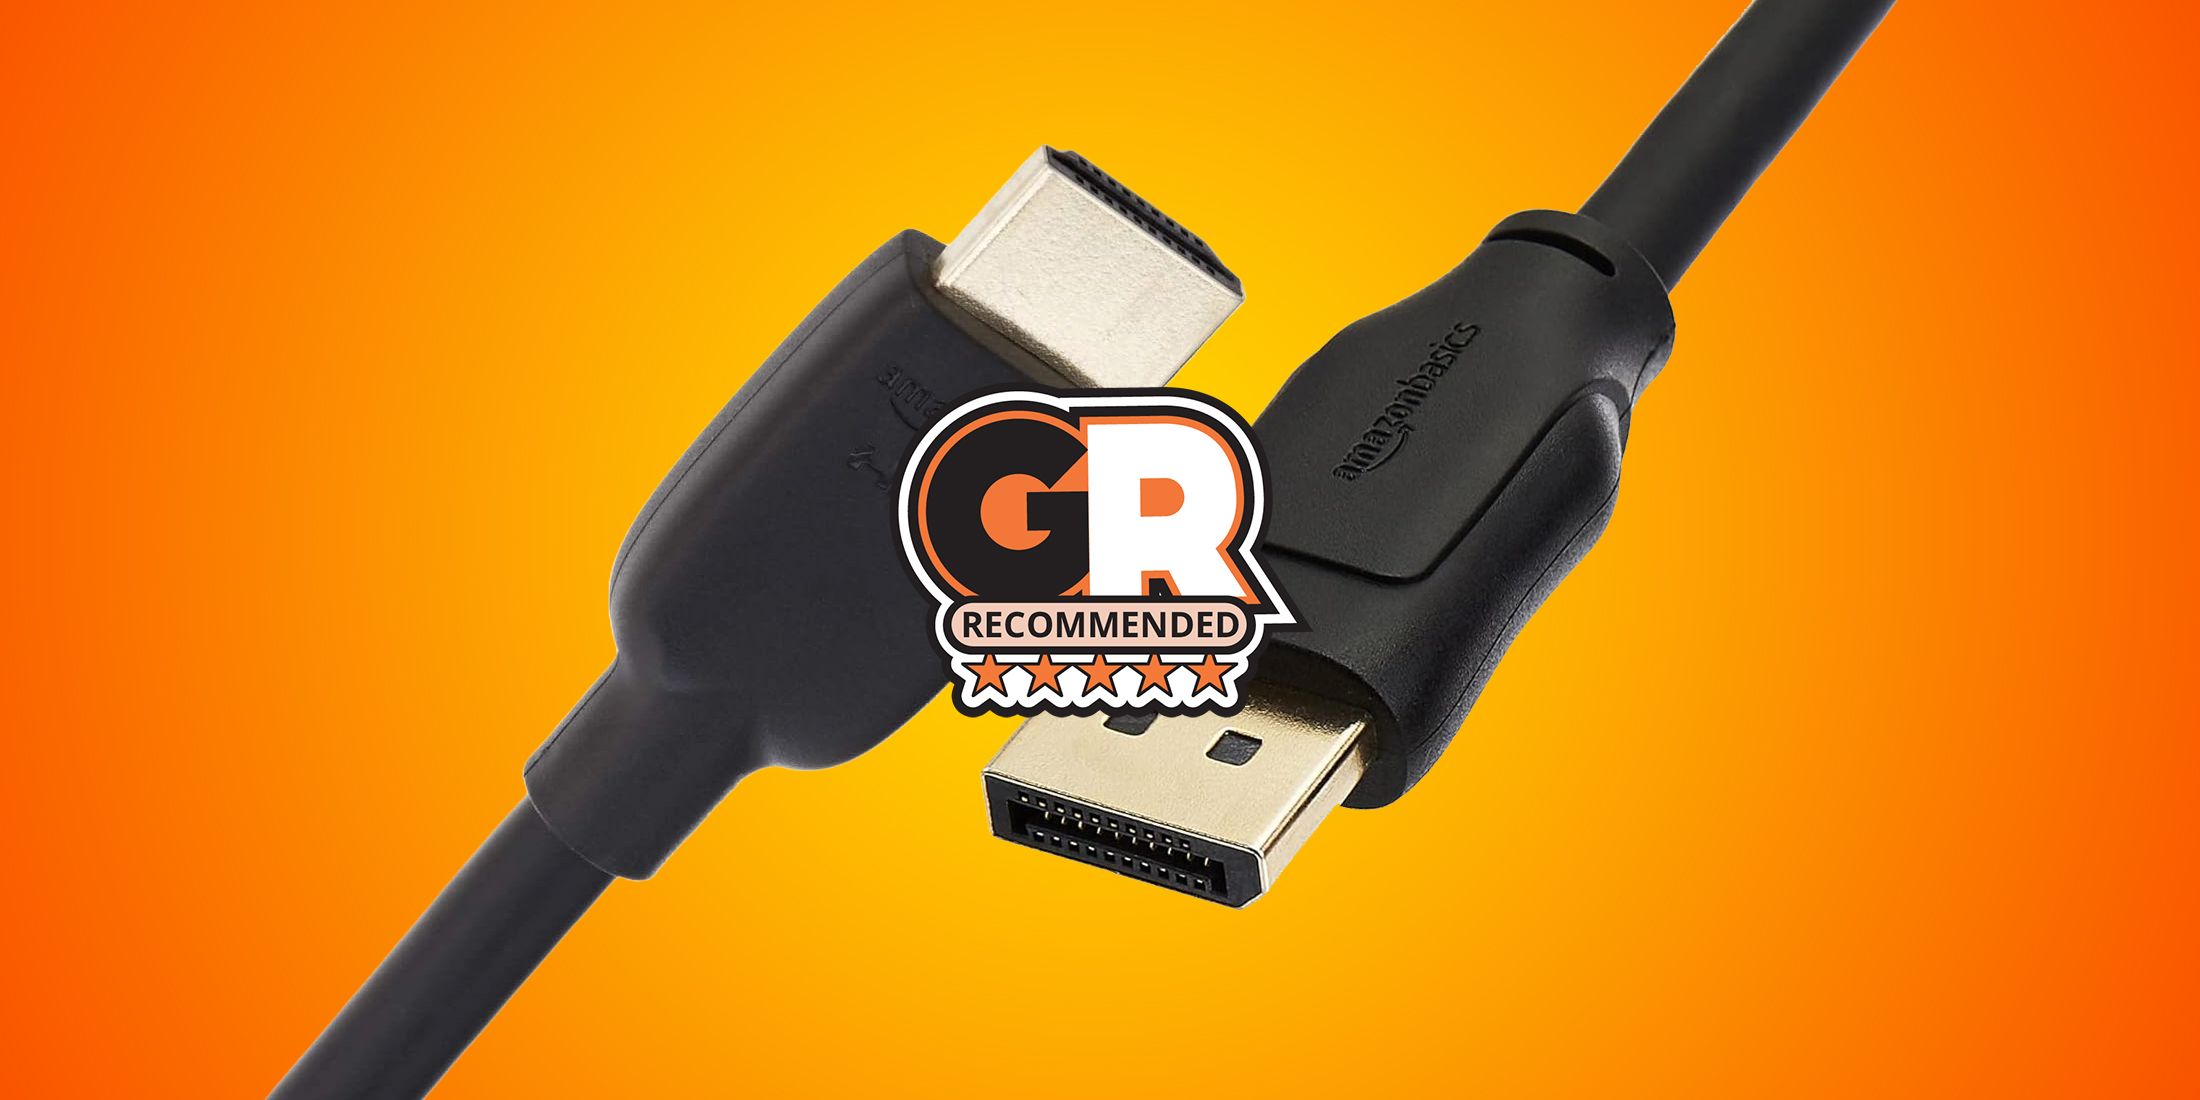 Displayport vs. HDMI: Which is Better for Gaming